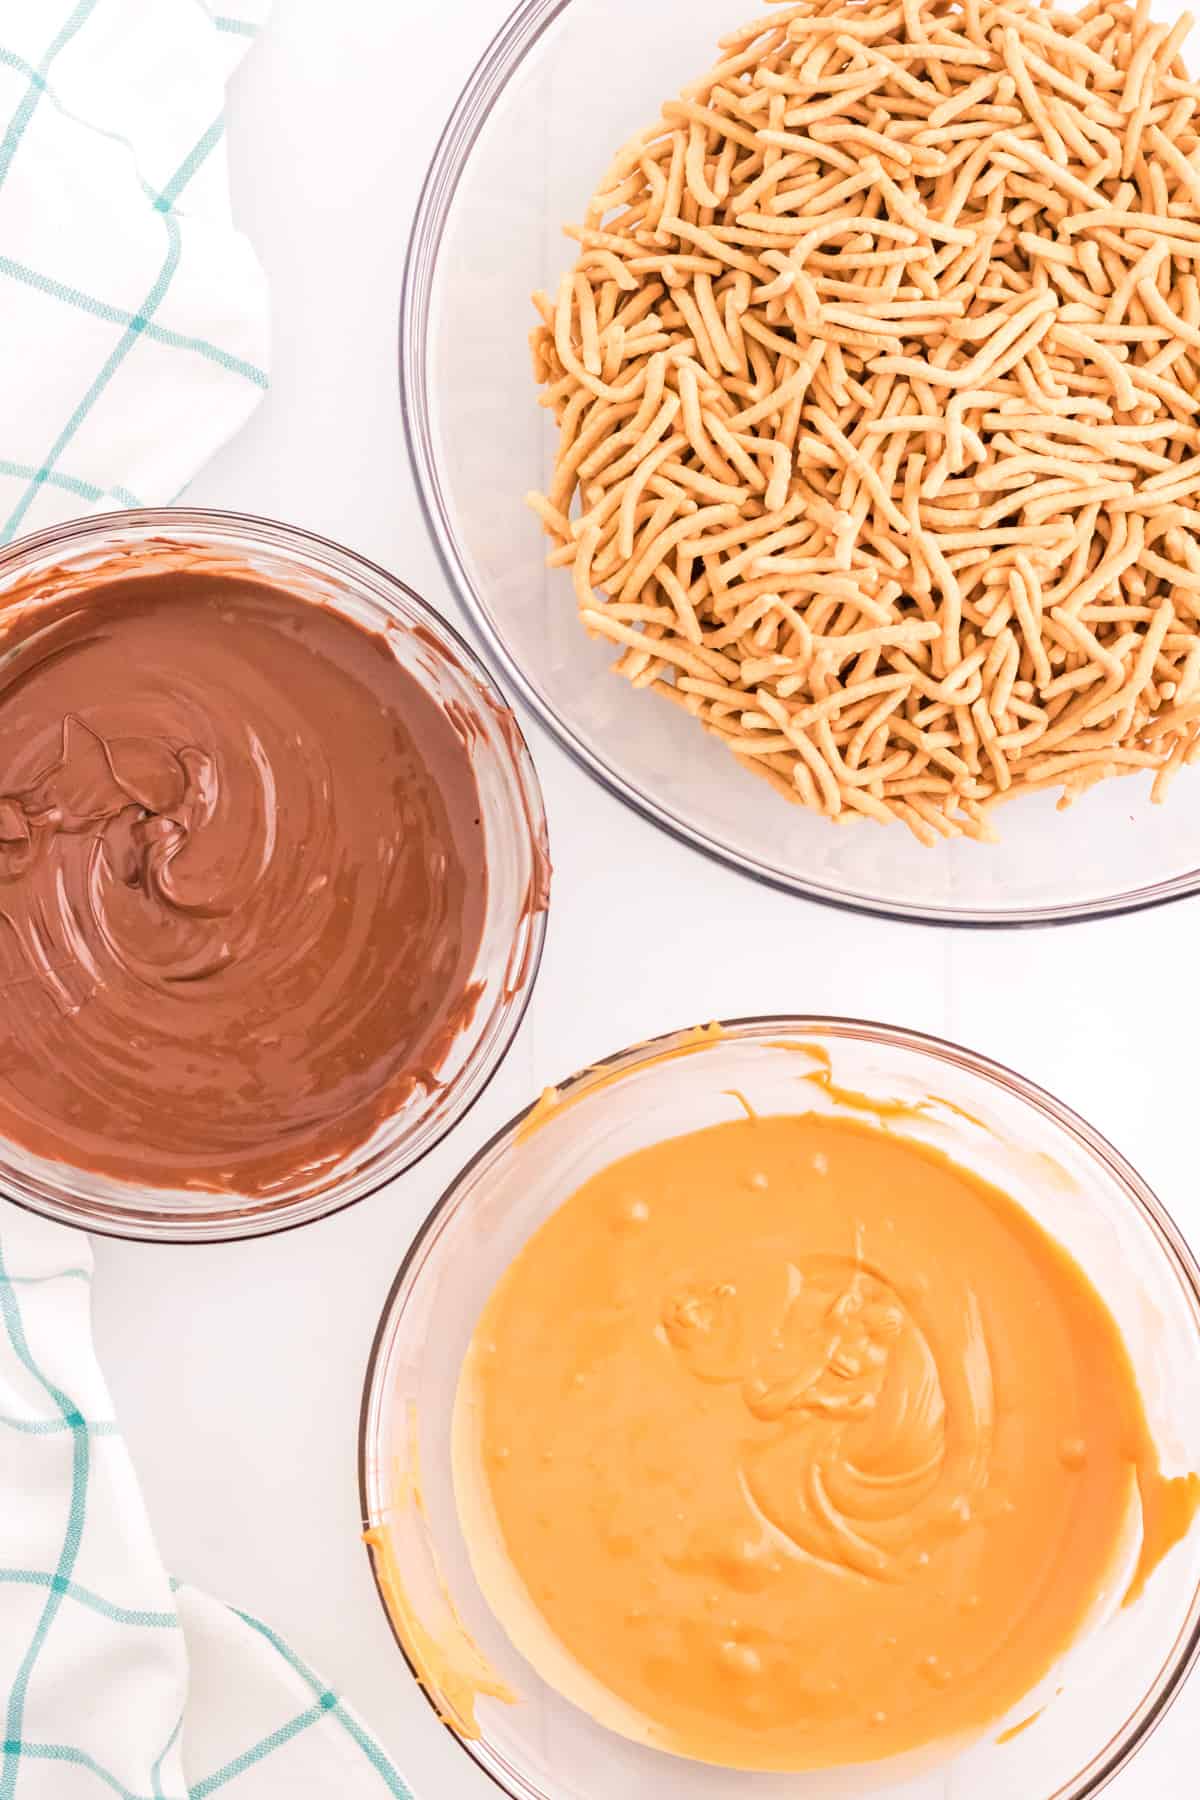 Bowl of melted chocolate, bowl of melted butterscotch, and bowl of chow mein noodles.